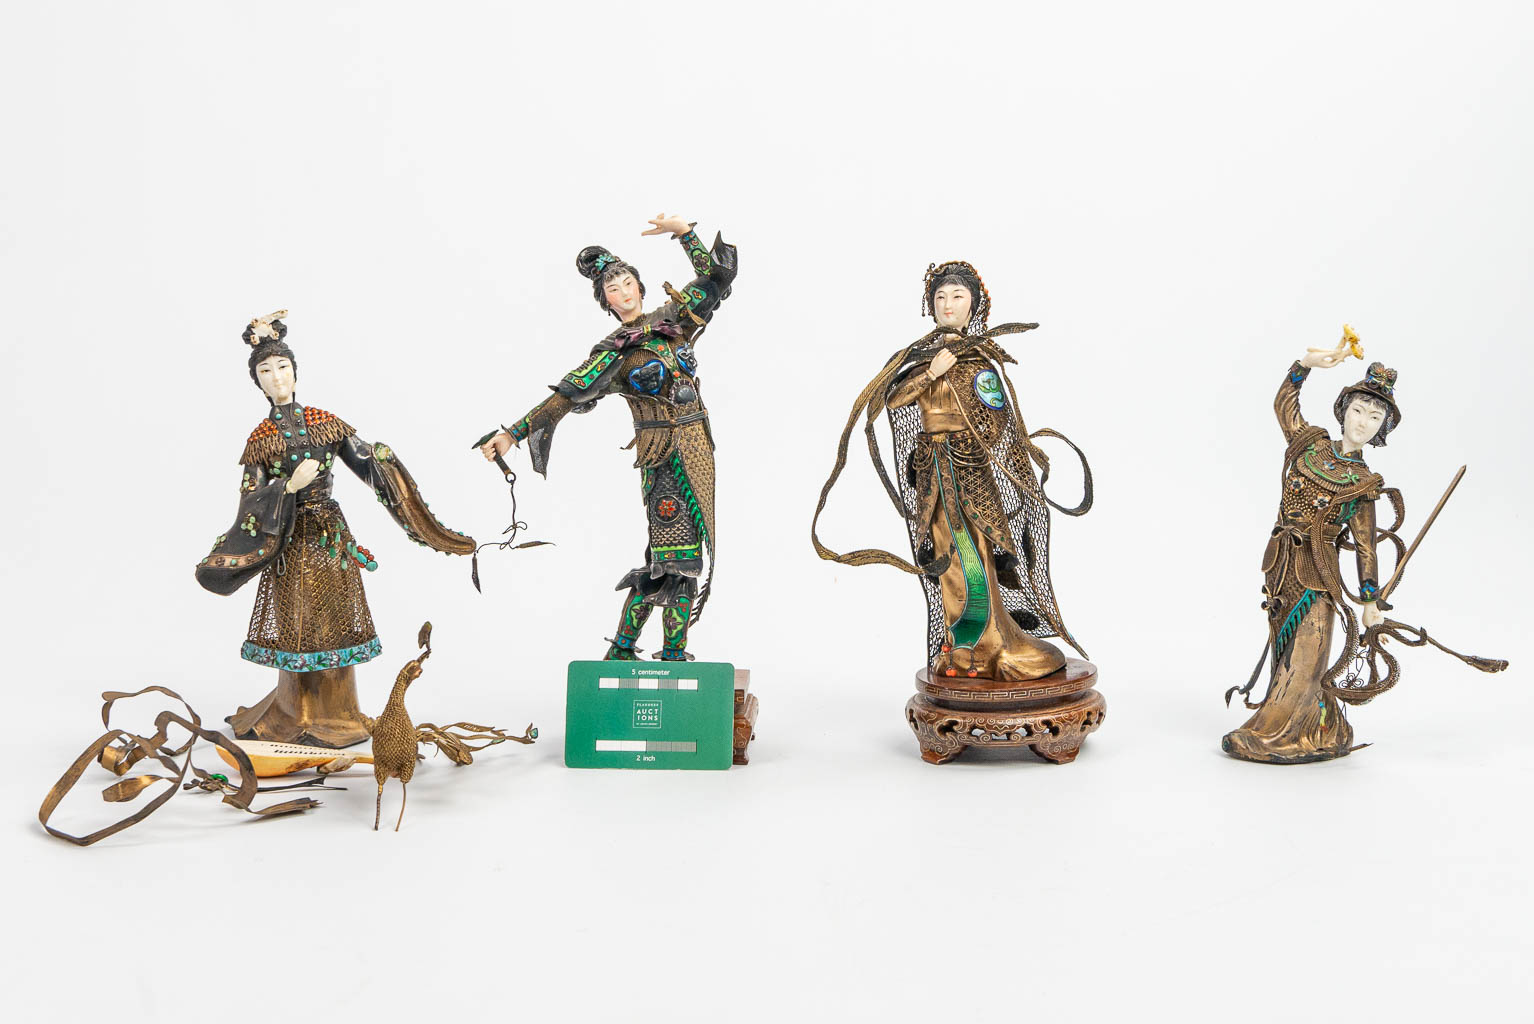 A collection of 4 figurines with weapons and music instruments, made of silver and finished with filigrana, cloisonné enamel, c